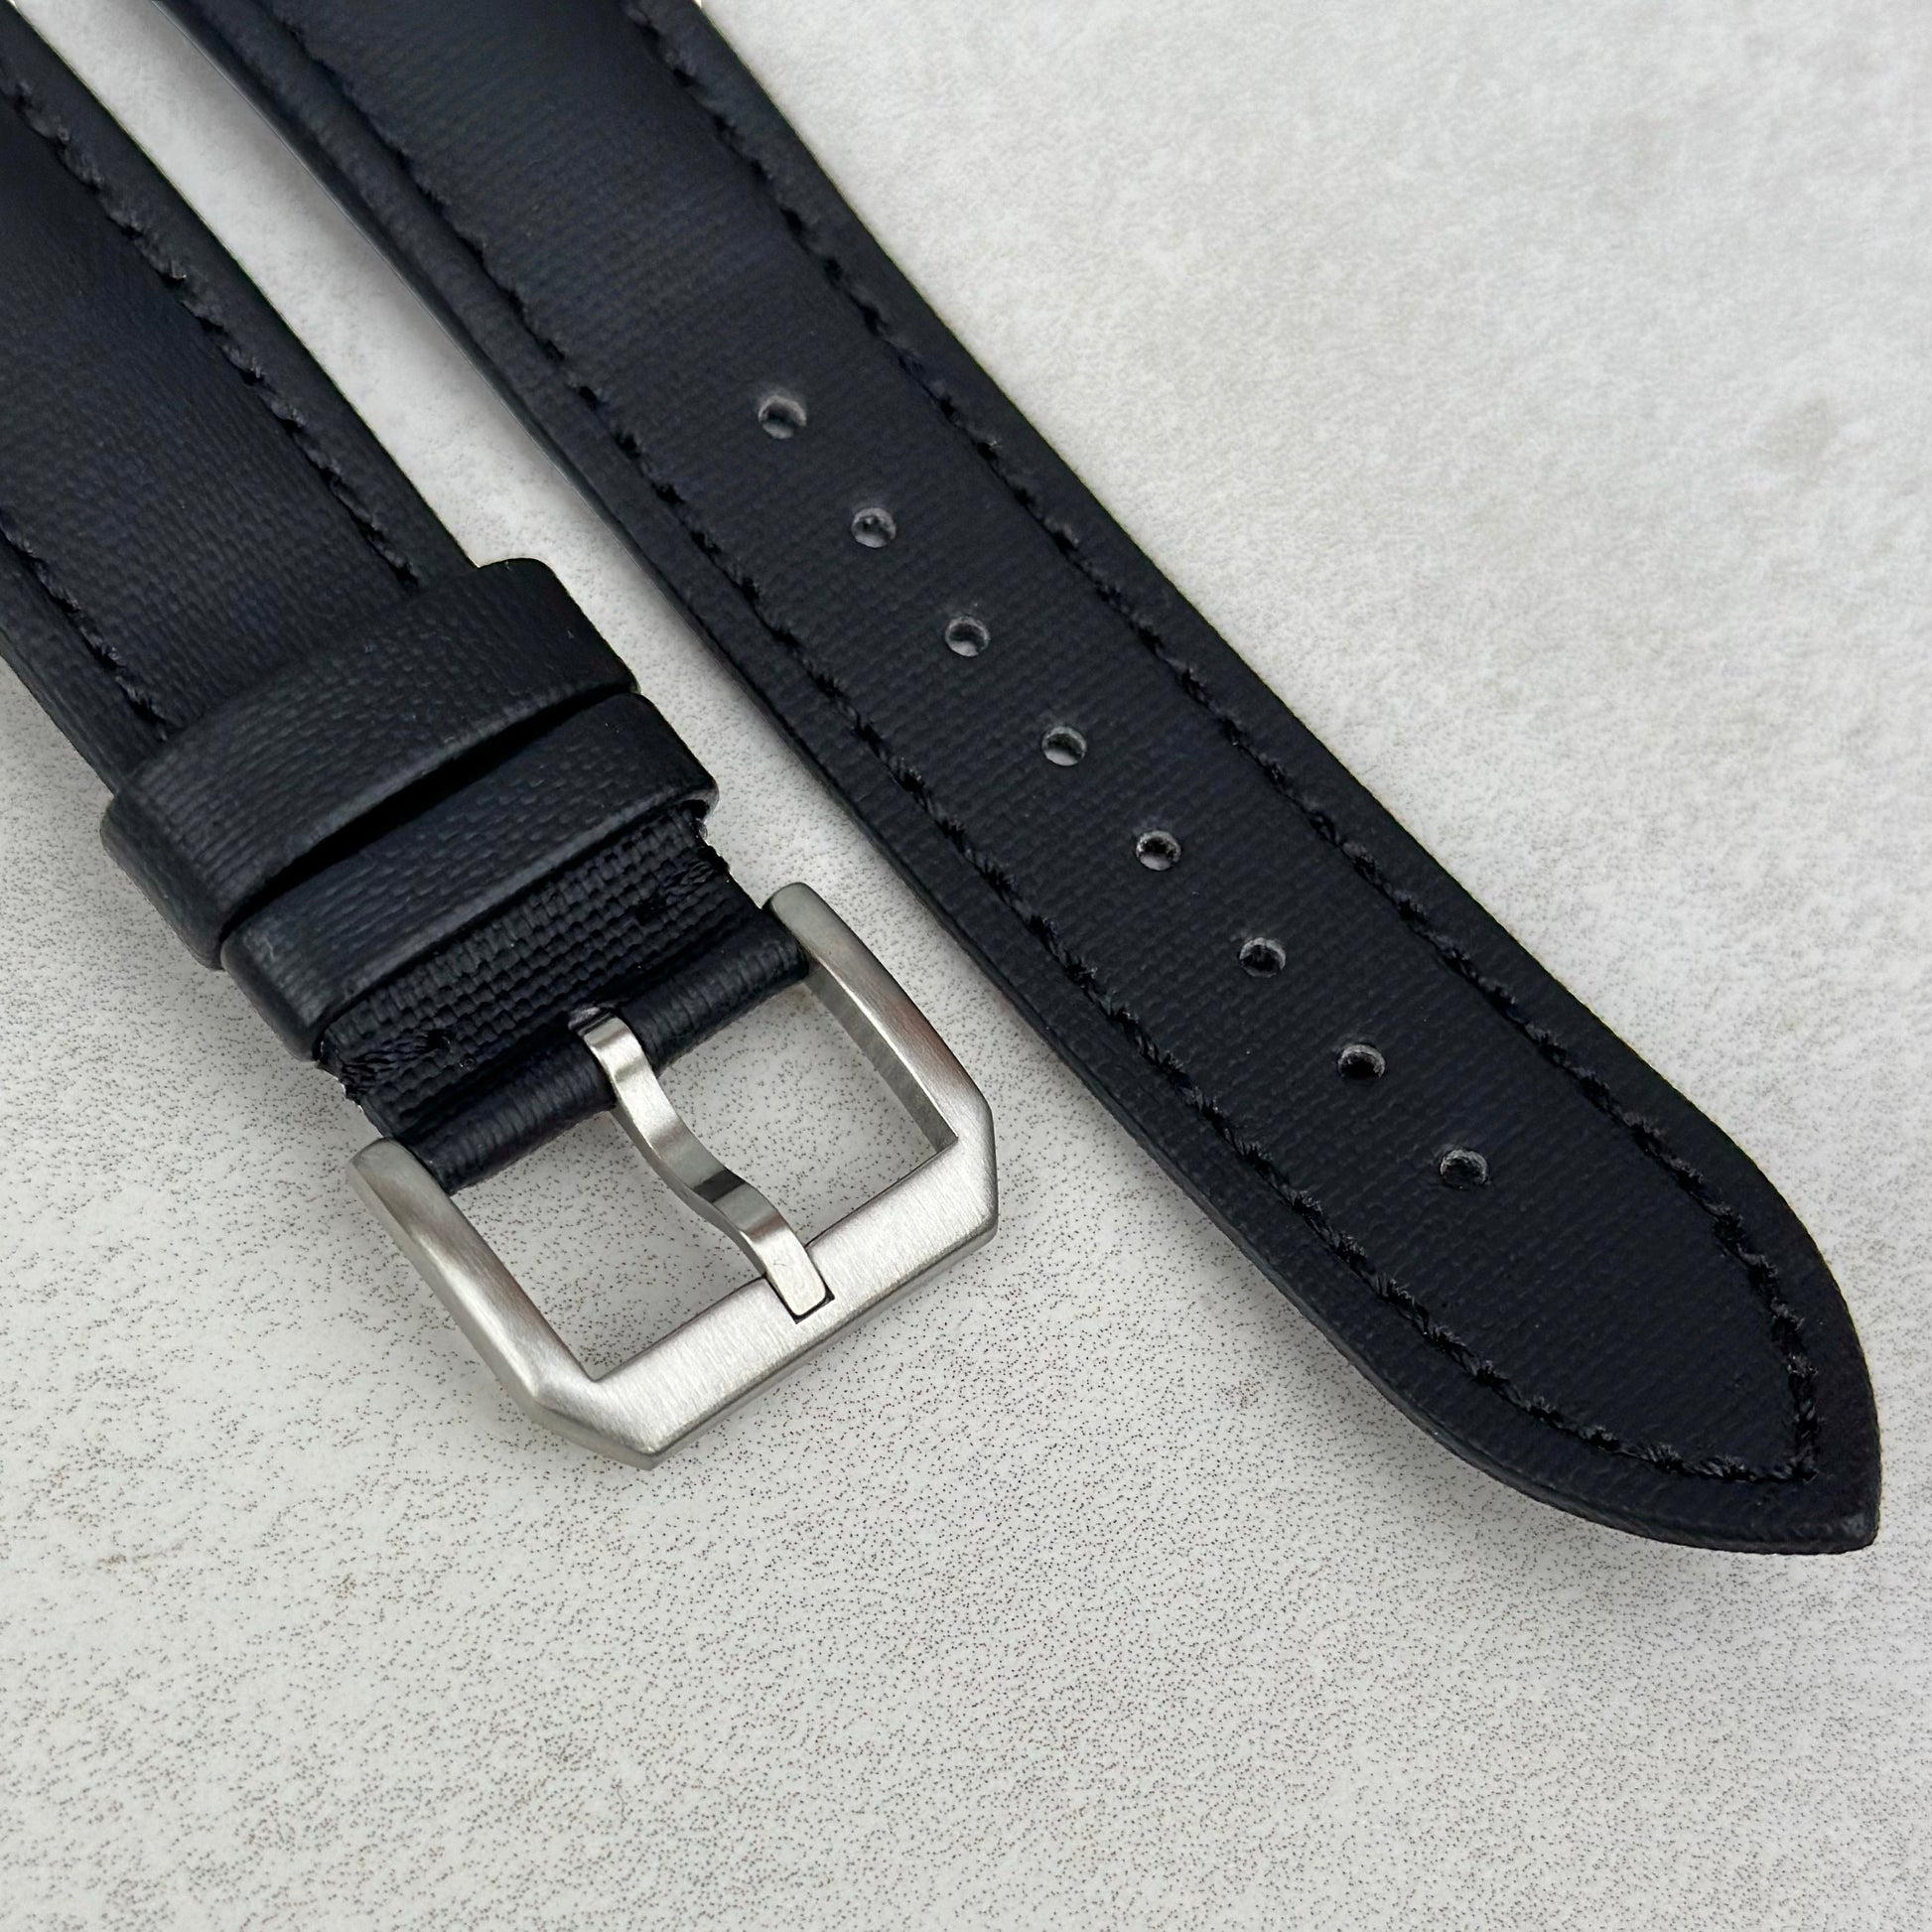 Brushed 316L stainless steel buckle on the Bermuda black sail cloth watch strap. Watch And Strap